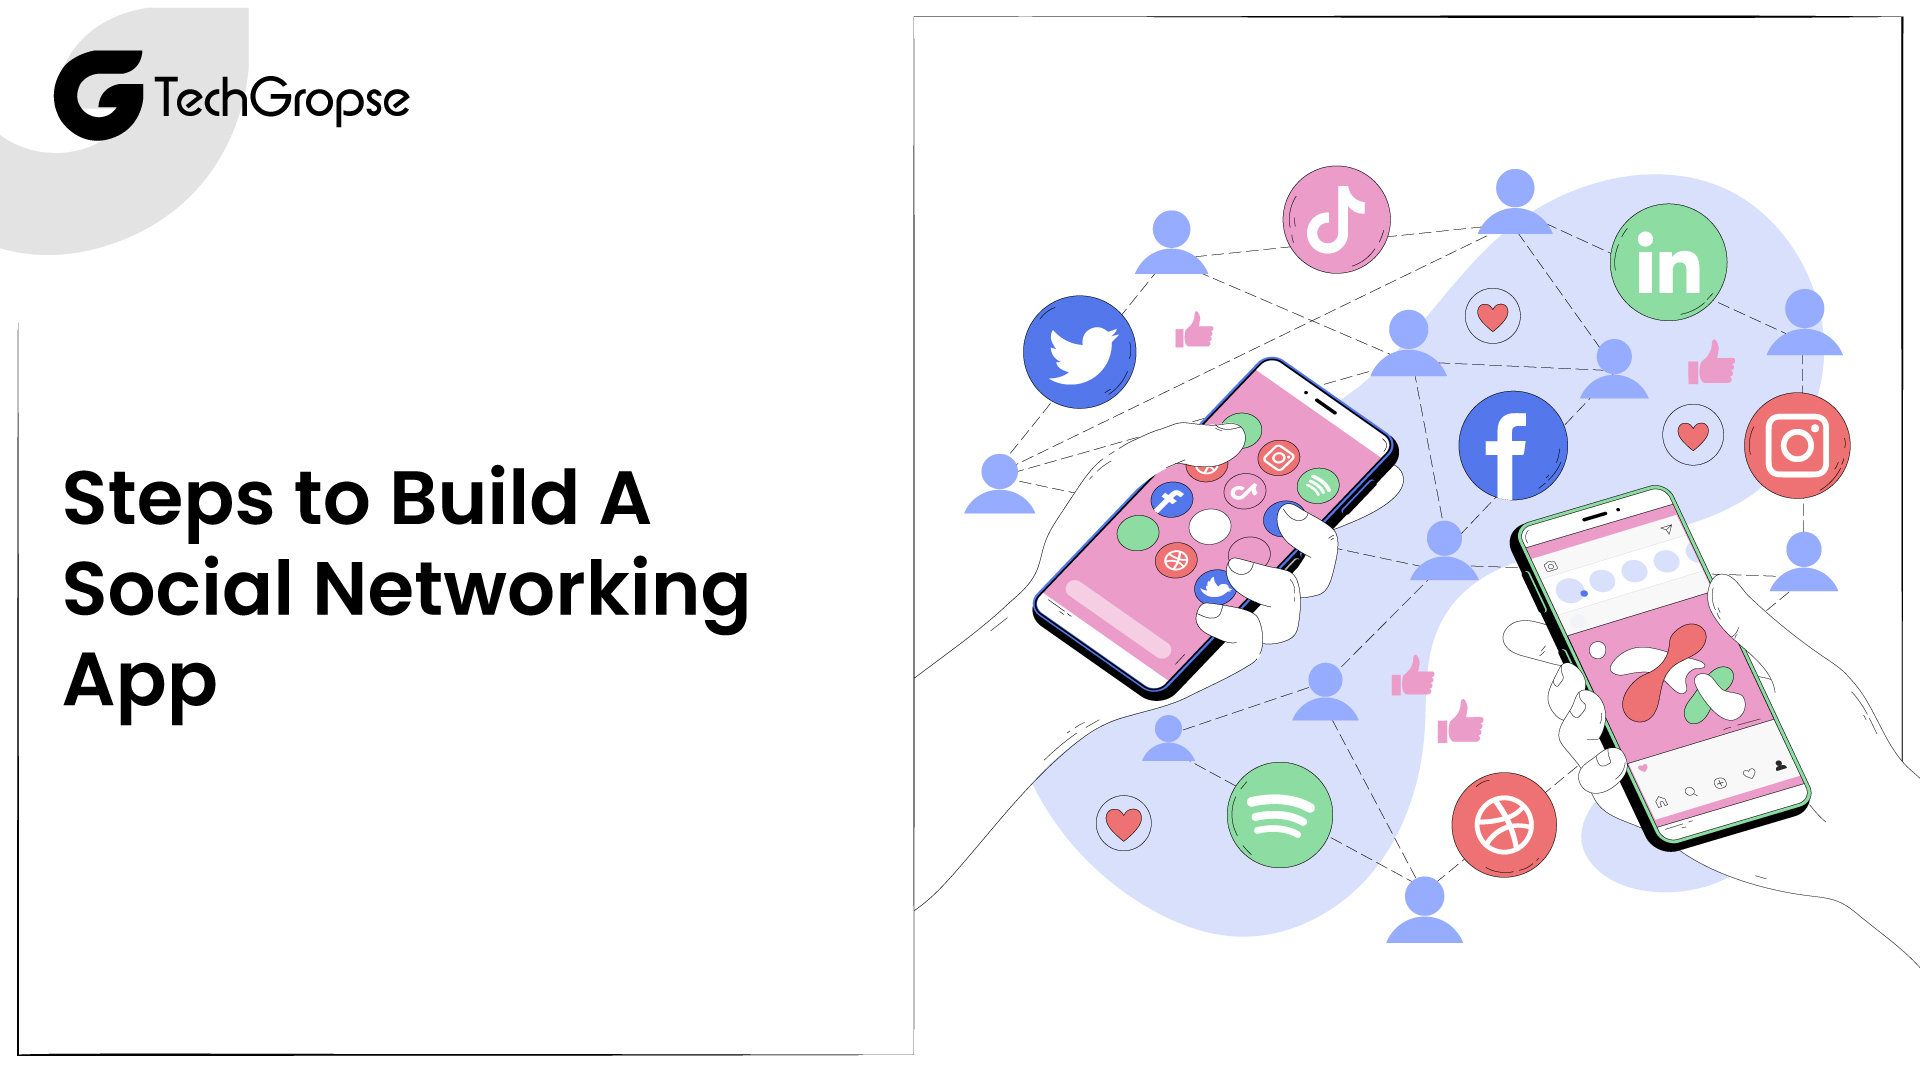 Steps to Build A Social Networking App